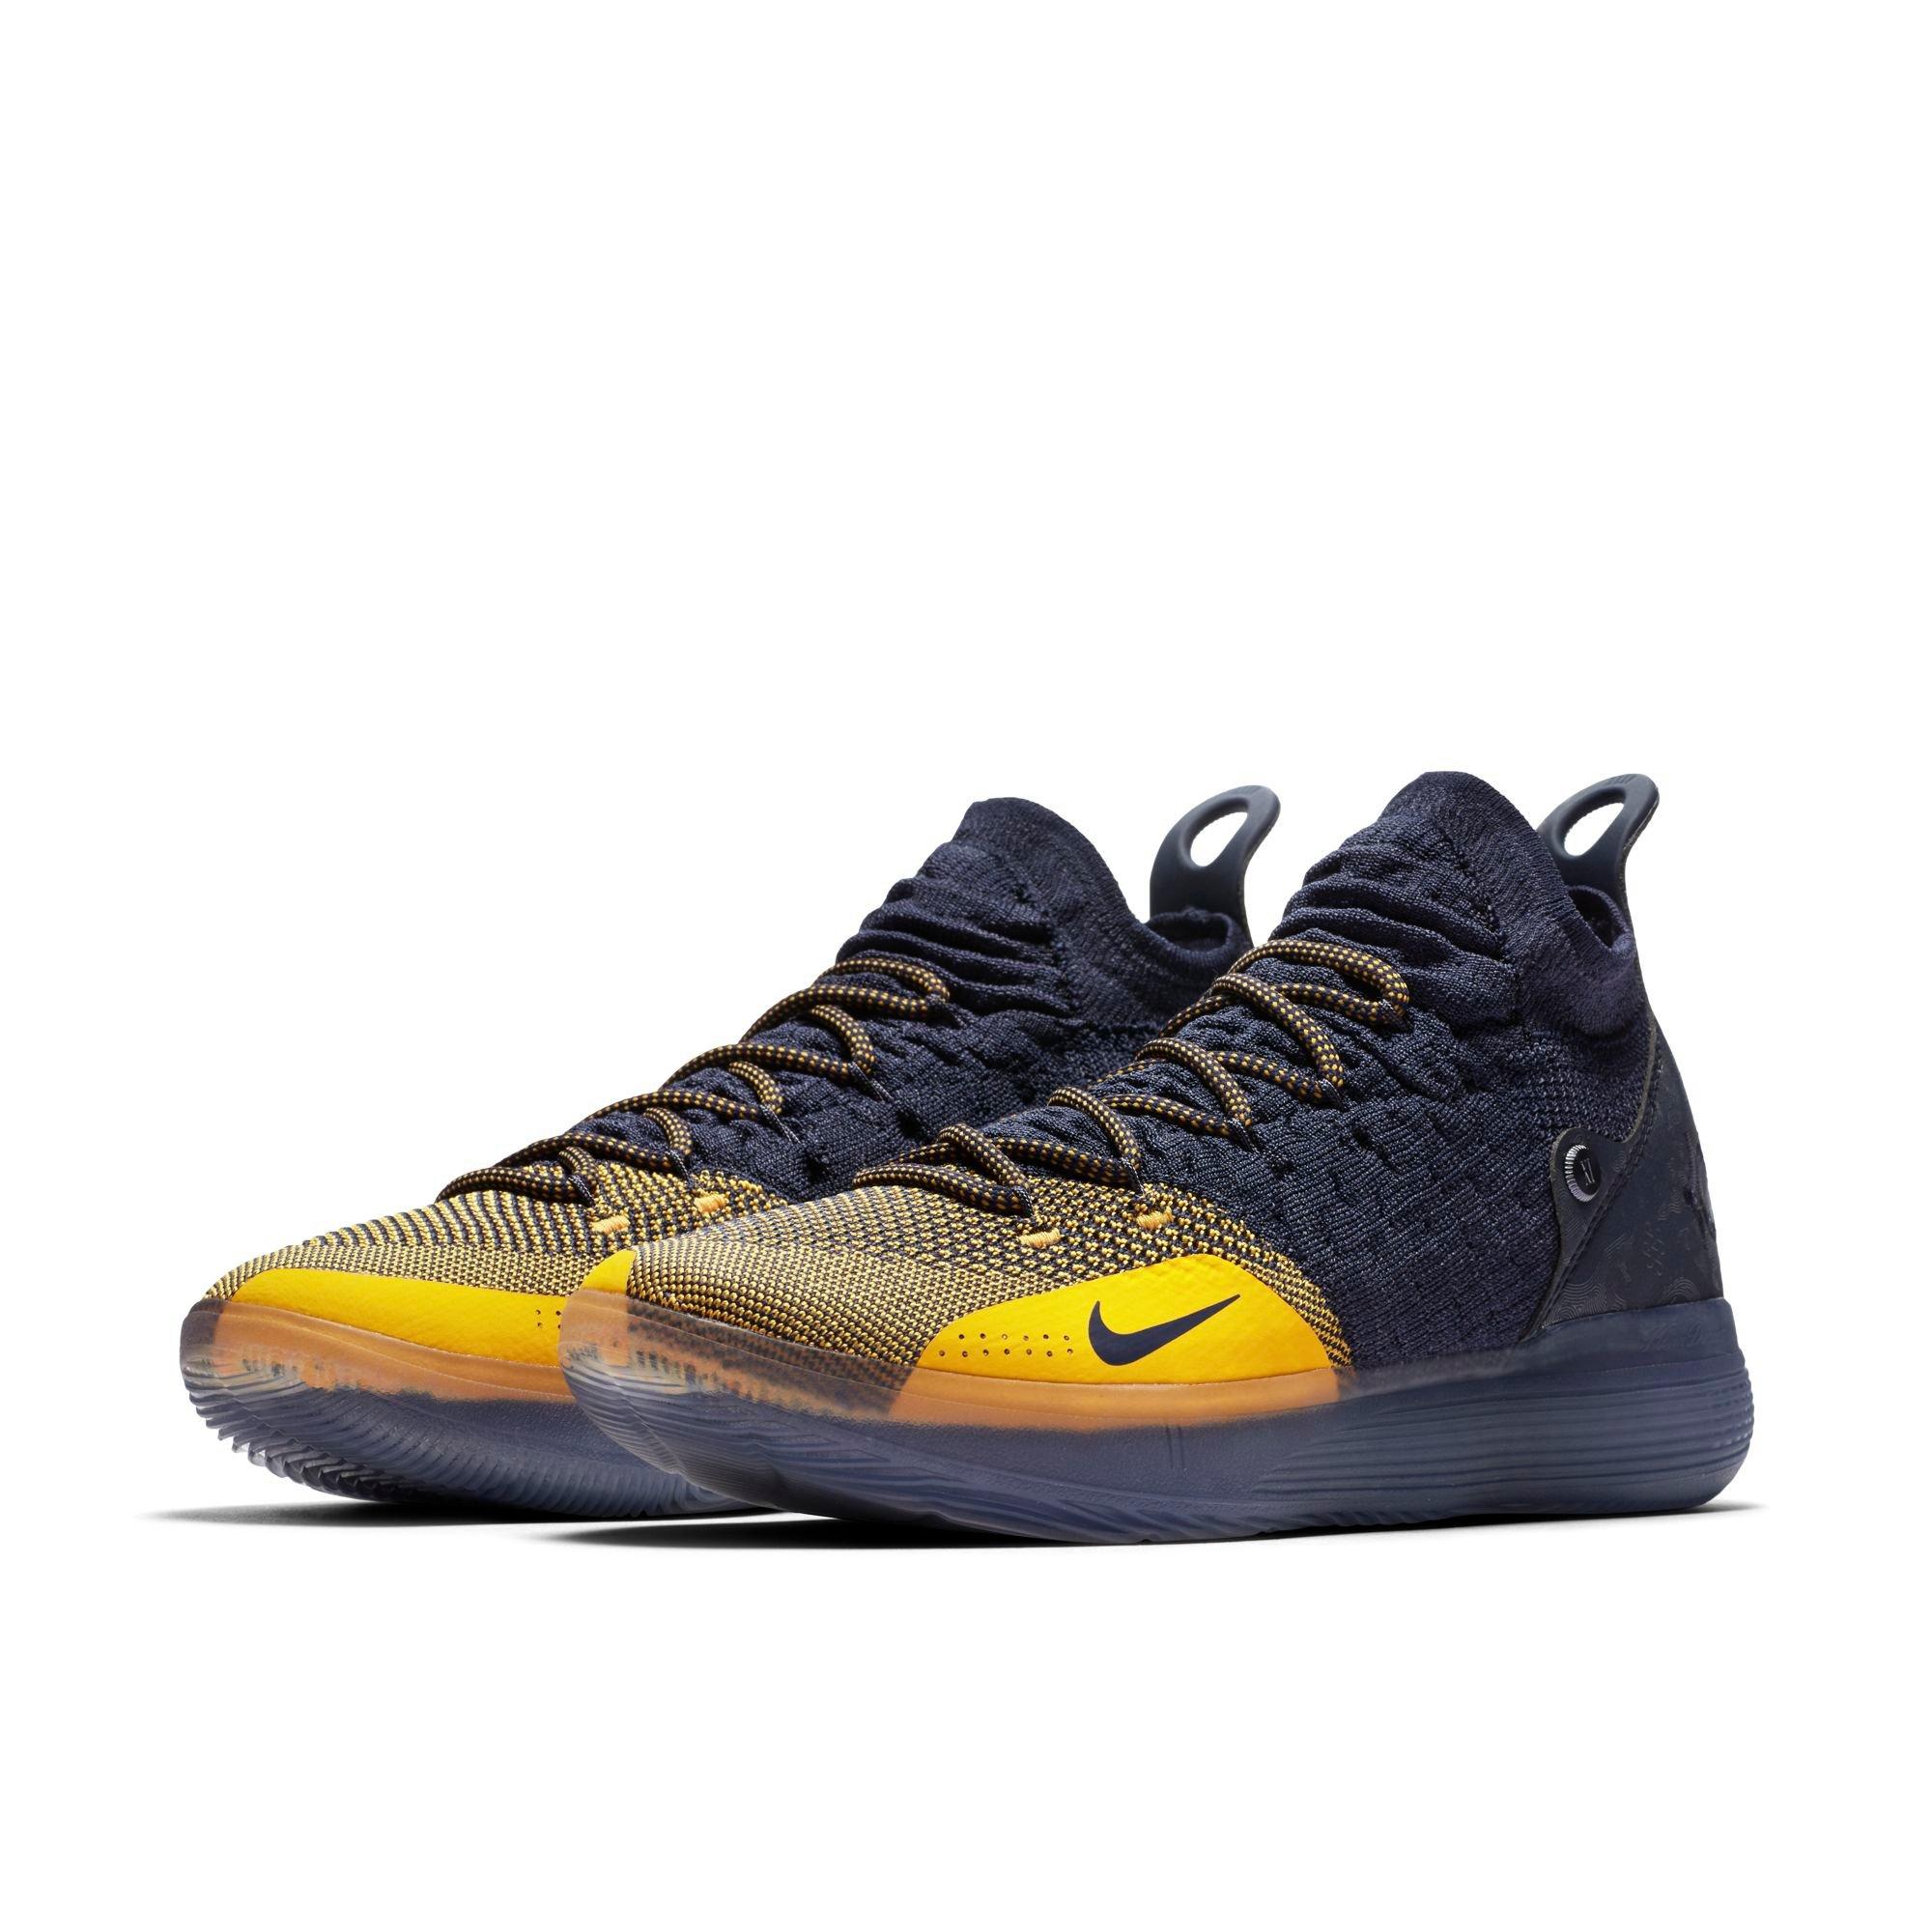 kd 11 golden state